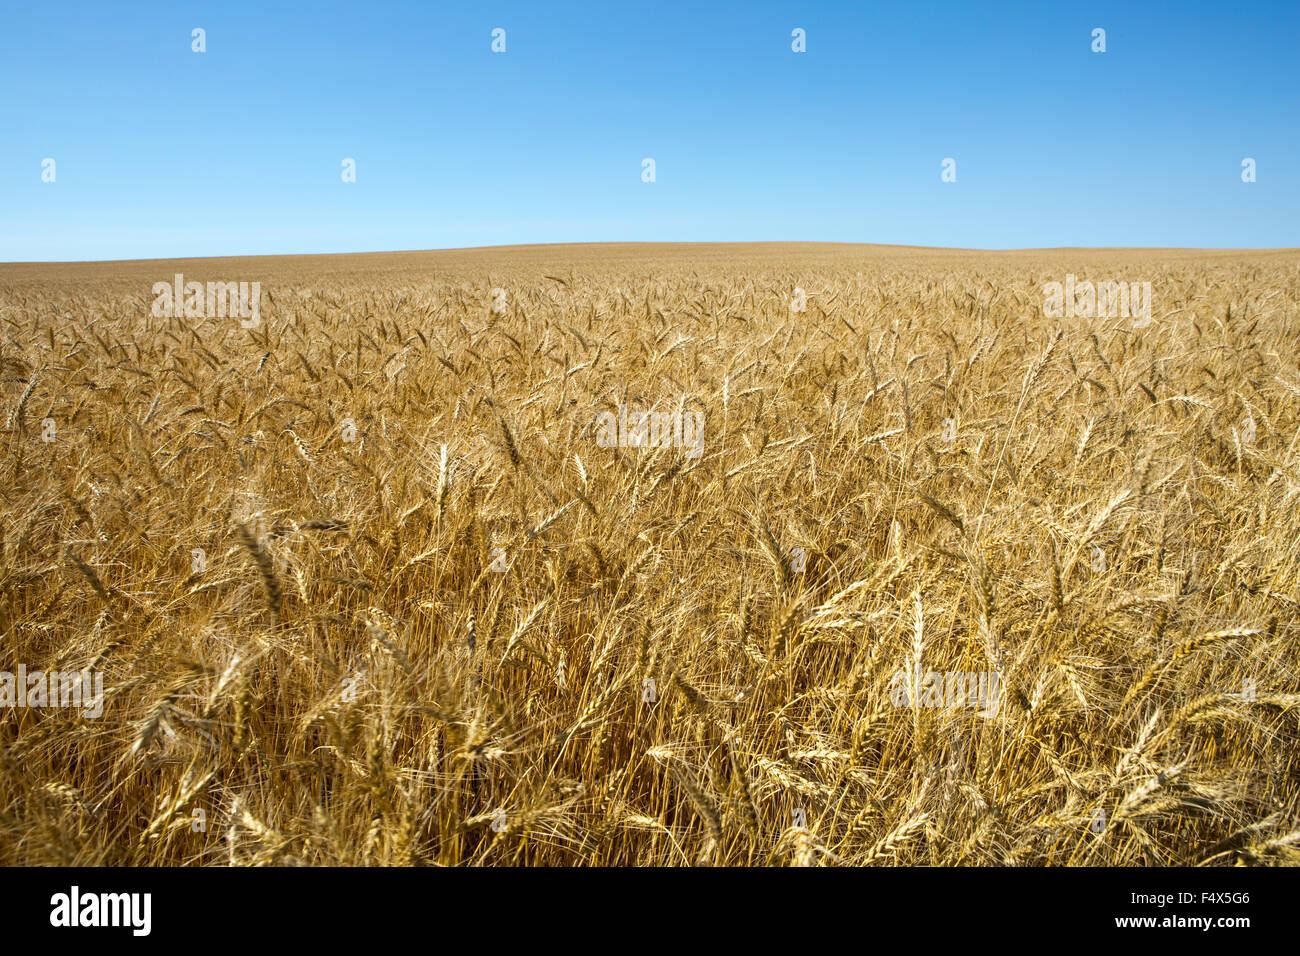 Golden fields of wheat grows on a agricultural farm. Stock Photo